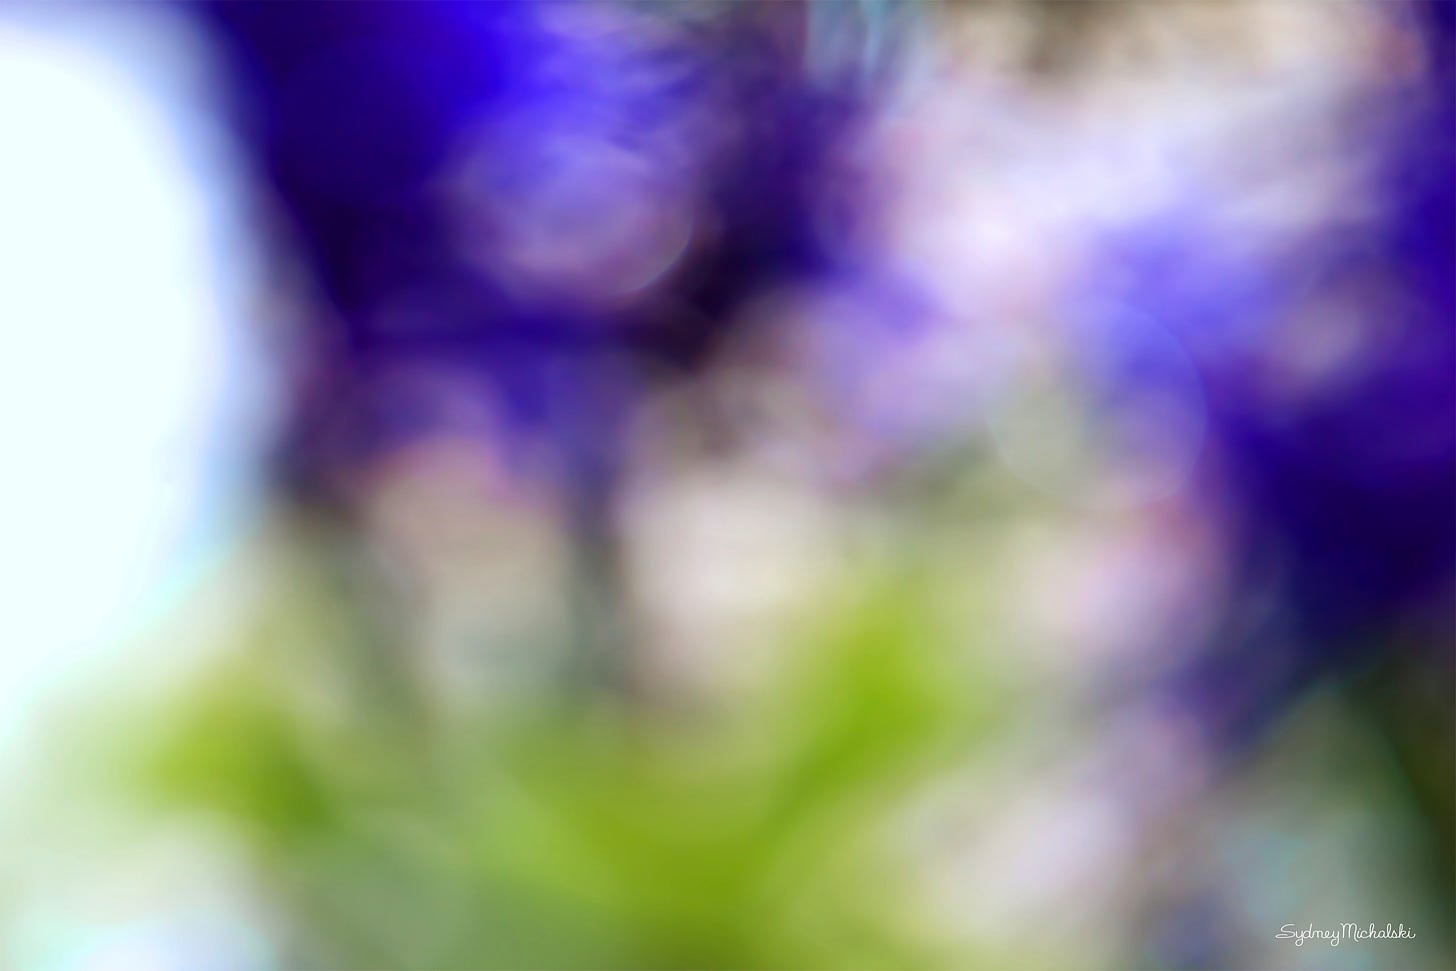 An impressionist image explores shades of light in a hyacinth garden: white, violet, aqua, green, and golden.